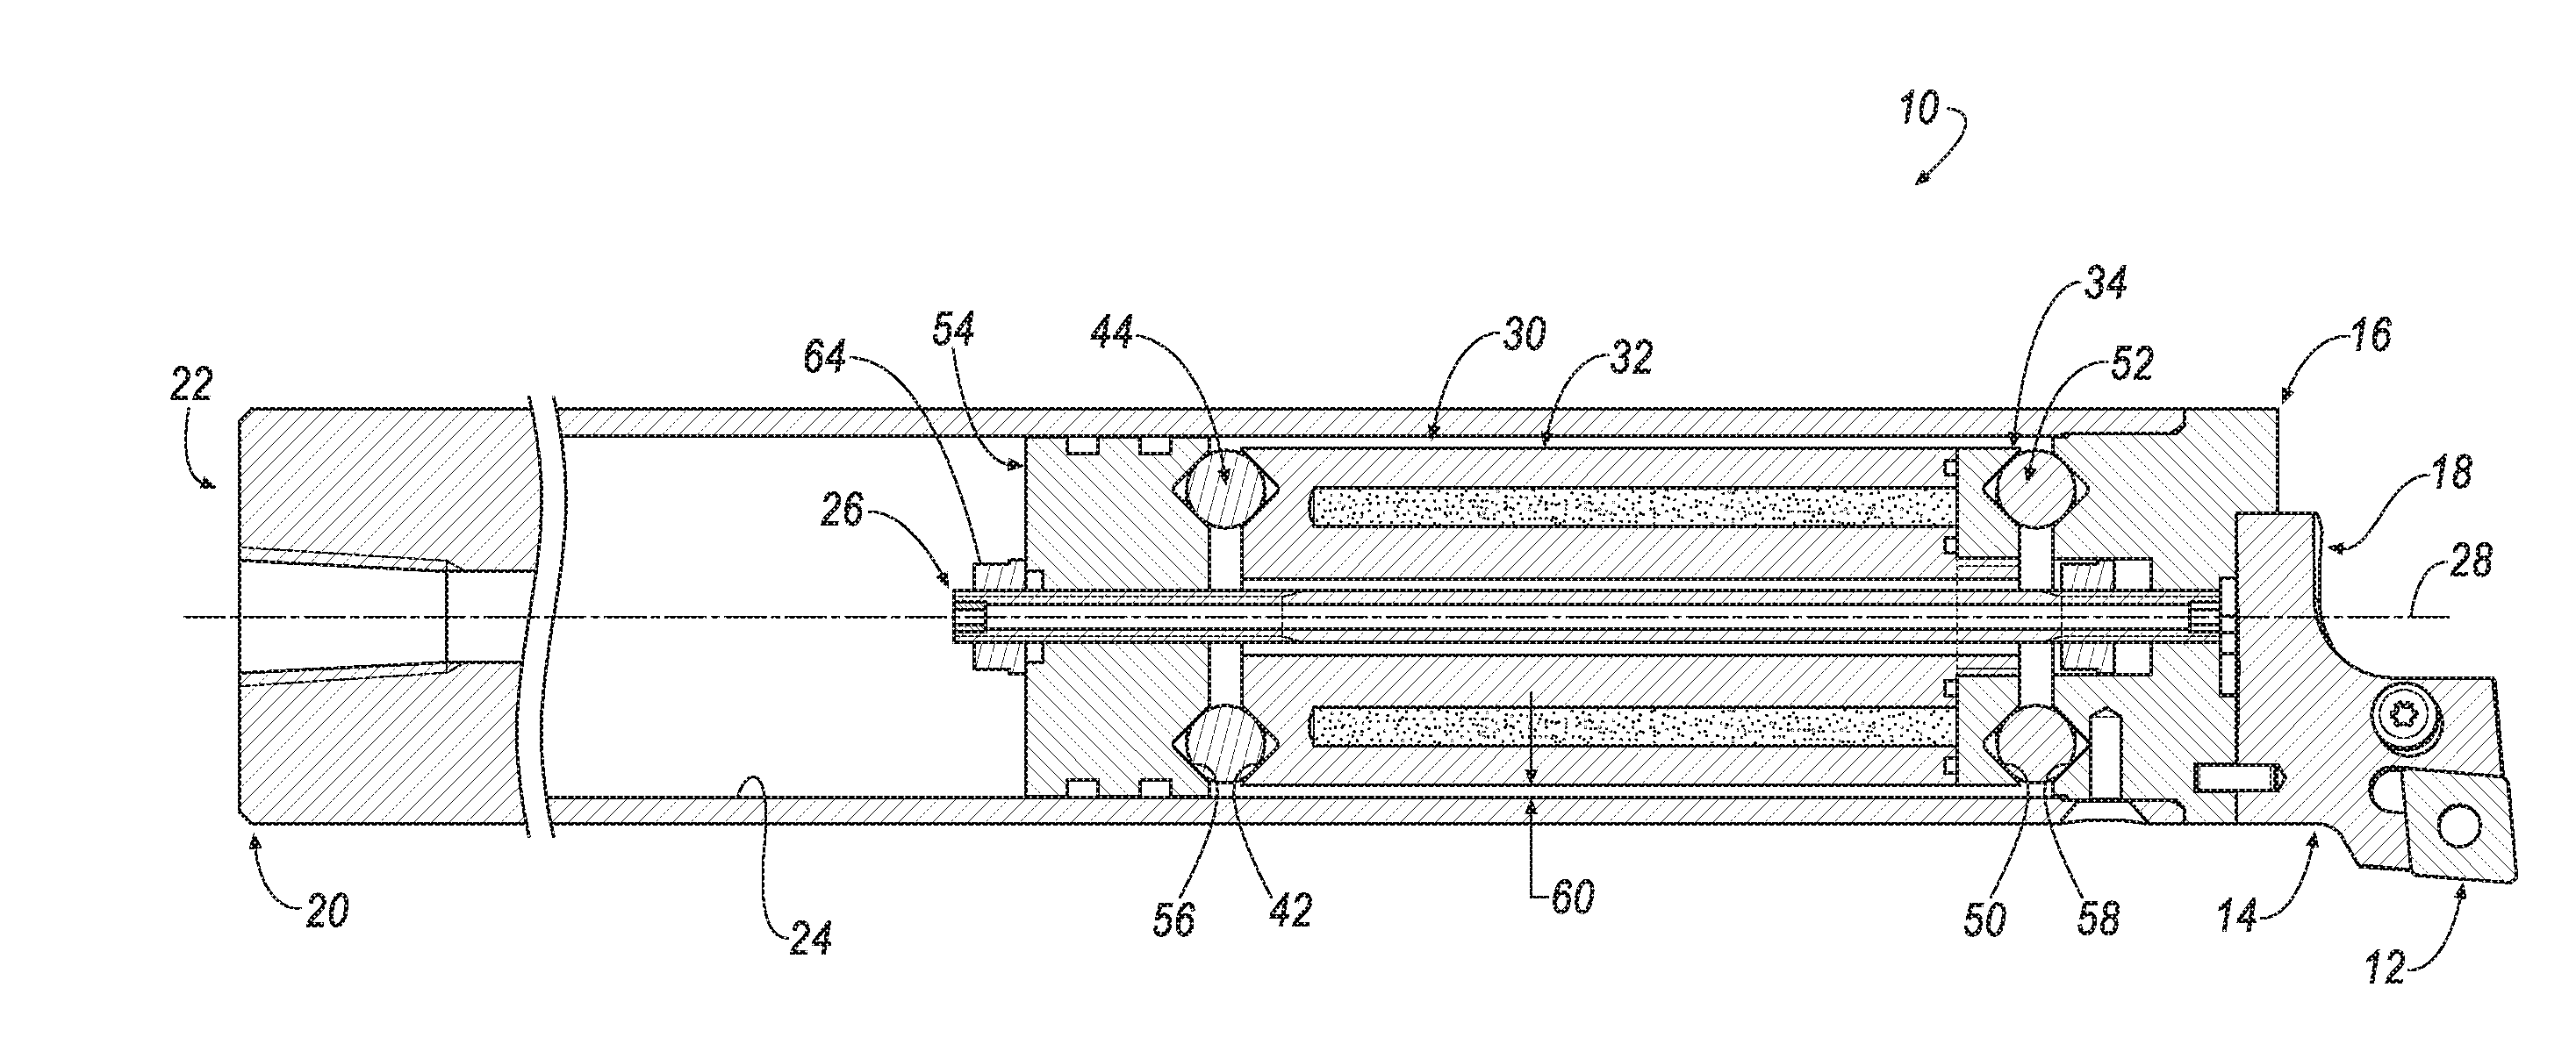 Toolholder with tunable passive vibration absorber assembly